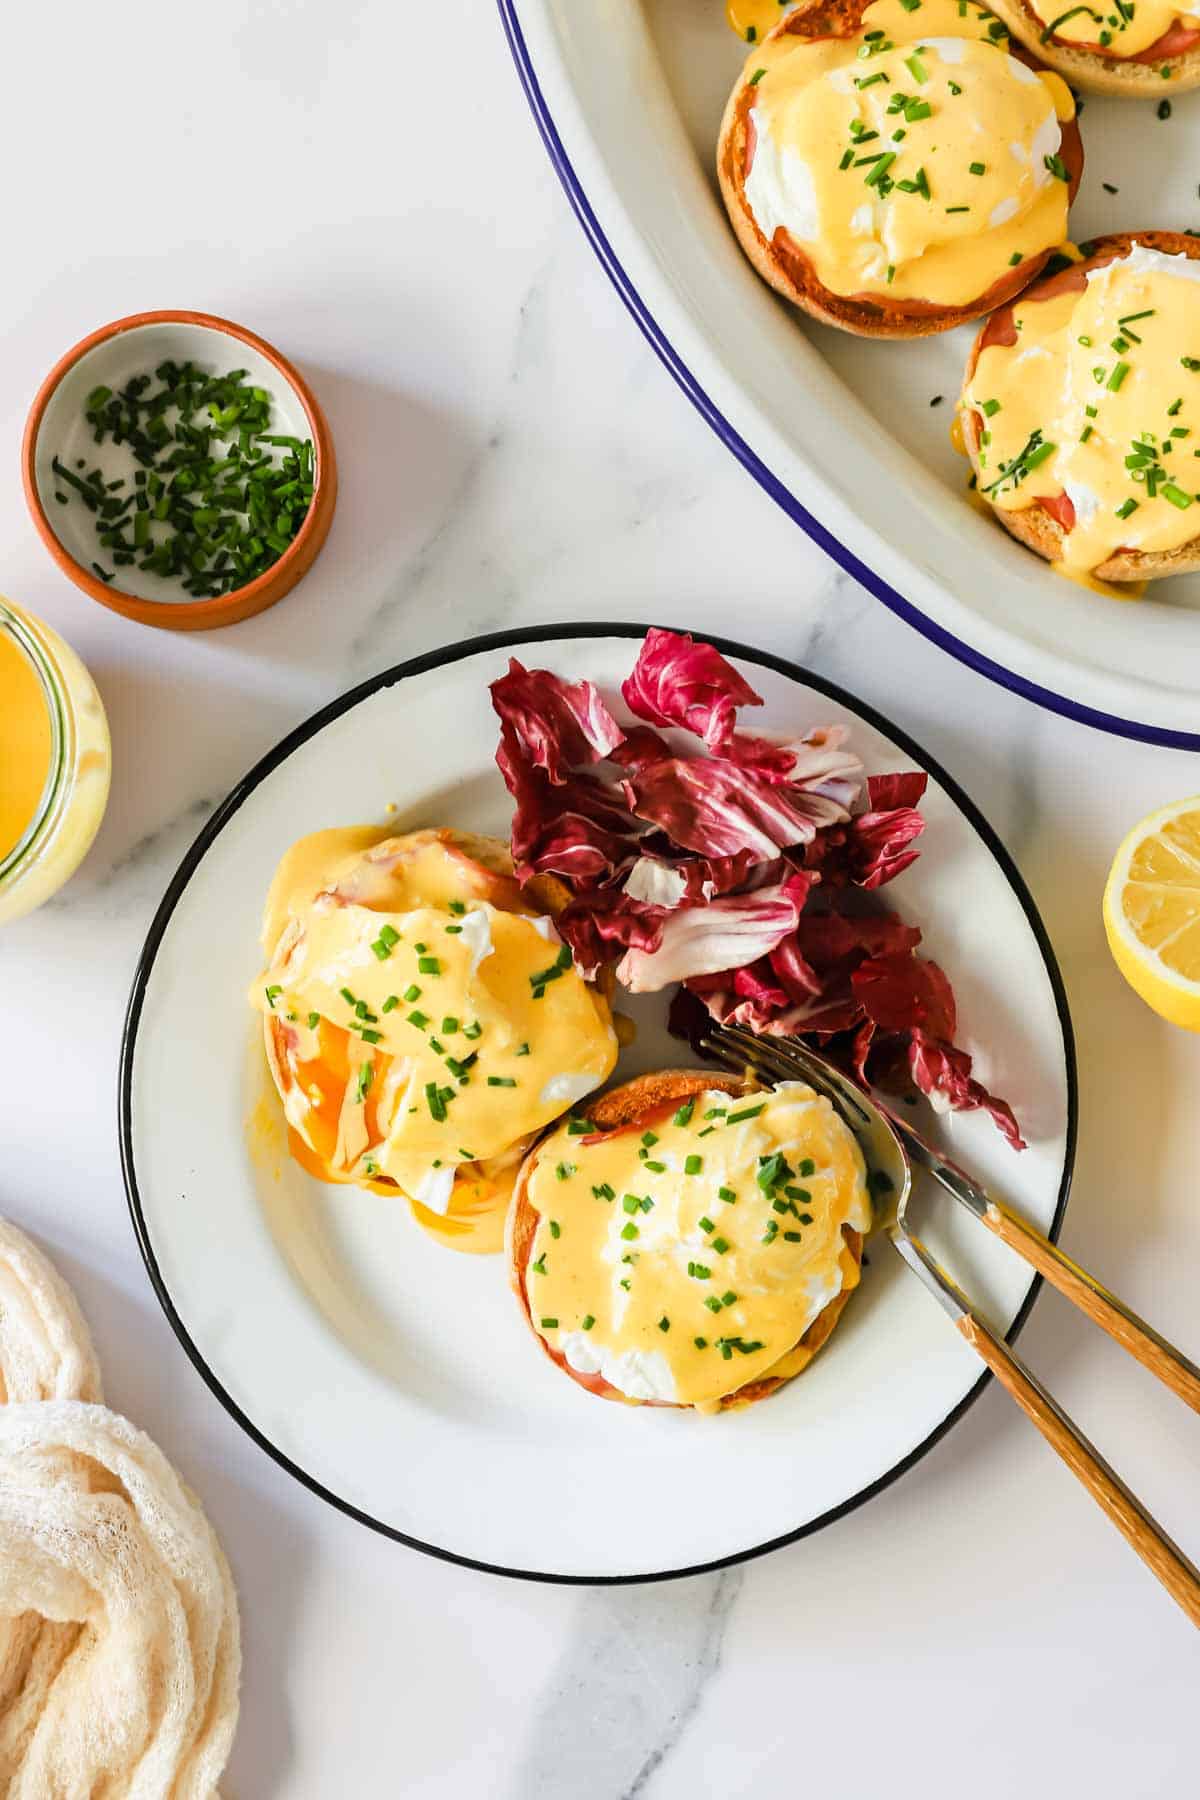 A plate with eggs benedict and red cabbage.